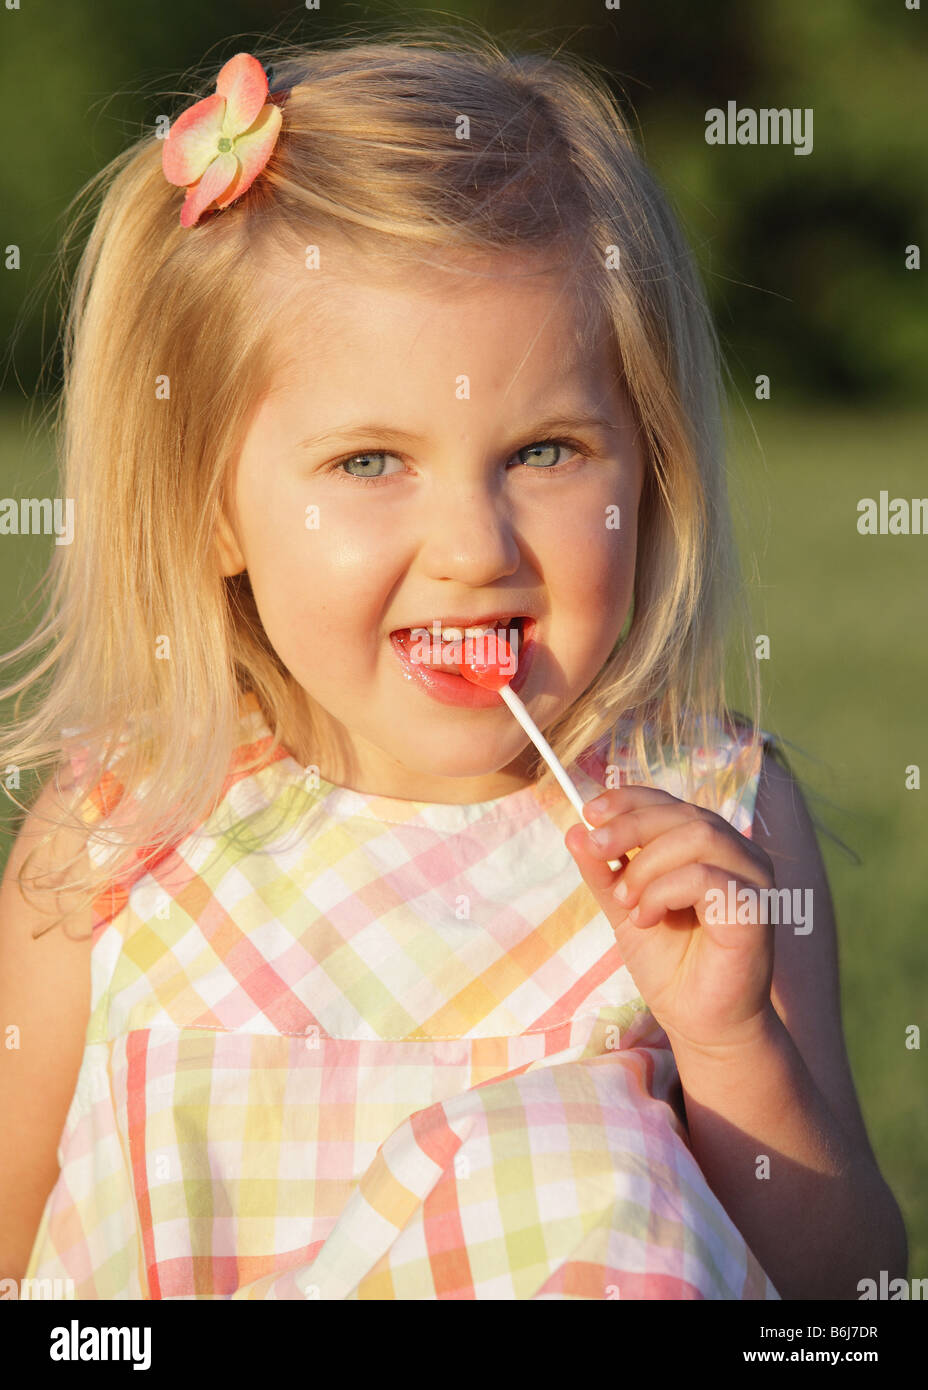 happy little girl eating candy outside Stock Photo